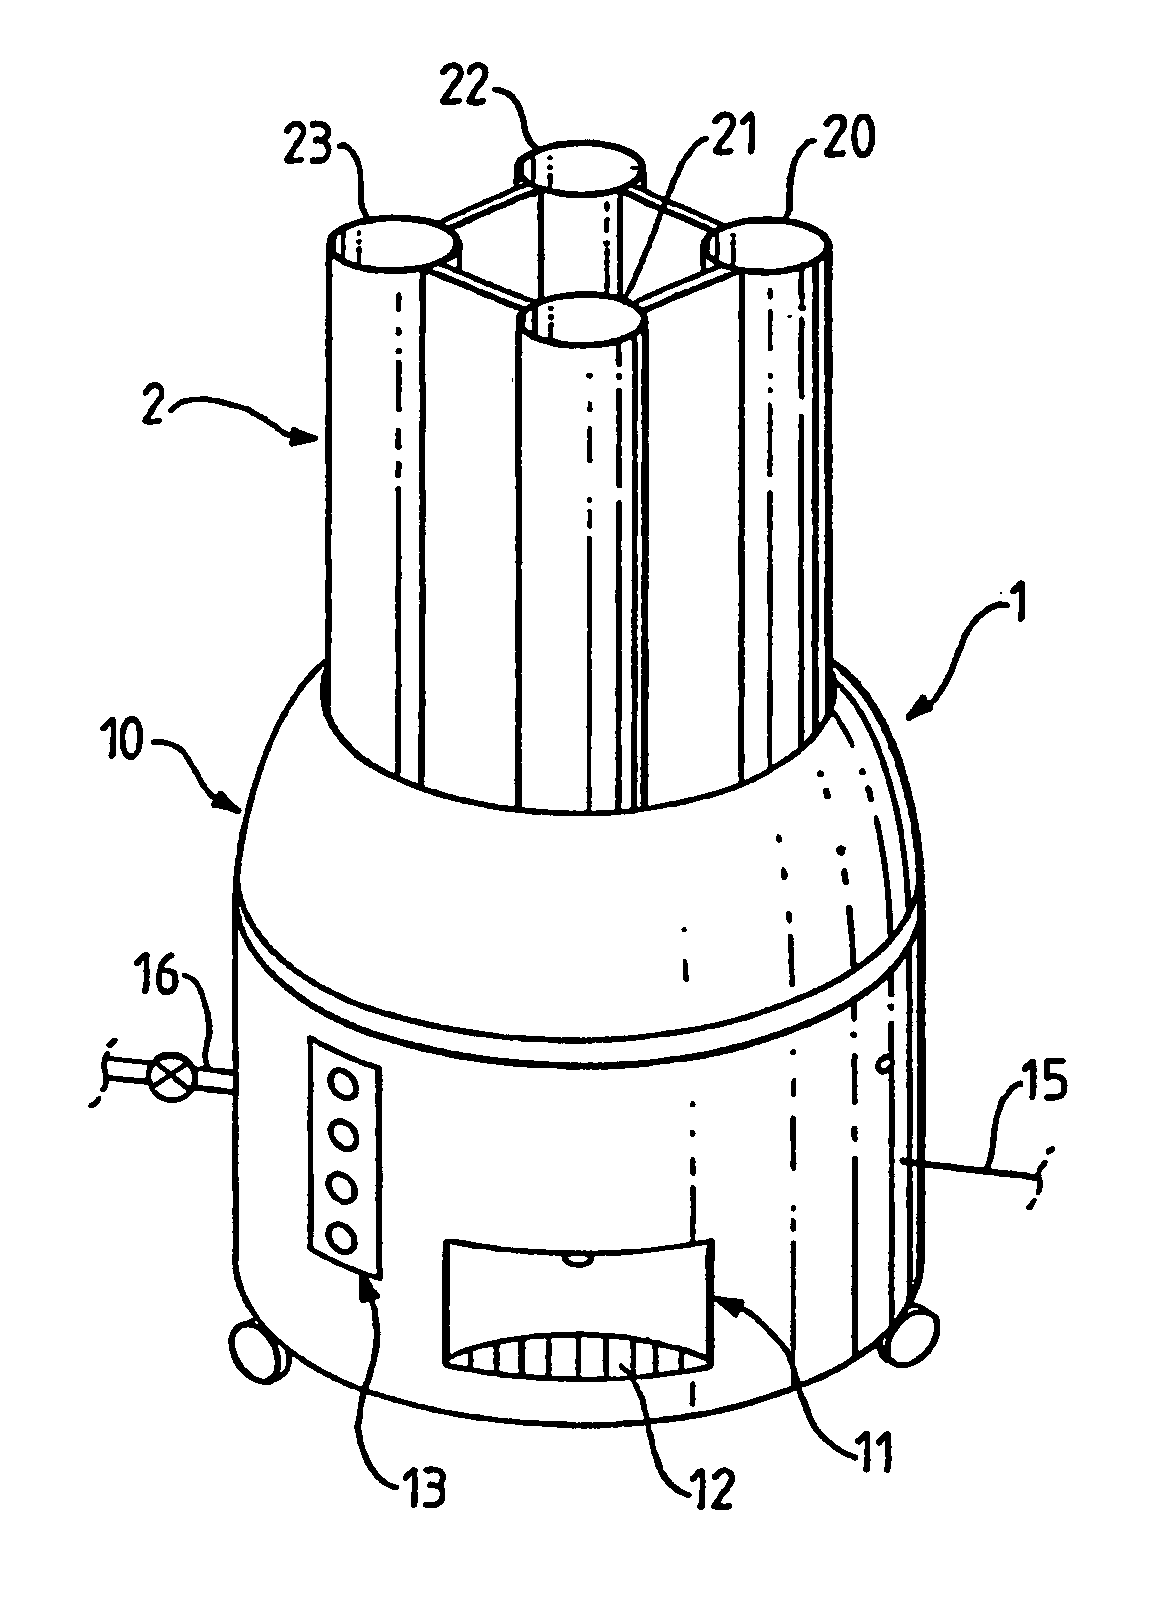 Device and method for selecting and brewing the contents of a capsule to prepare a beverage